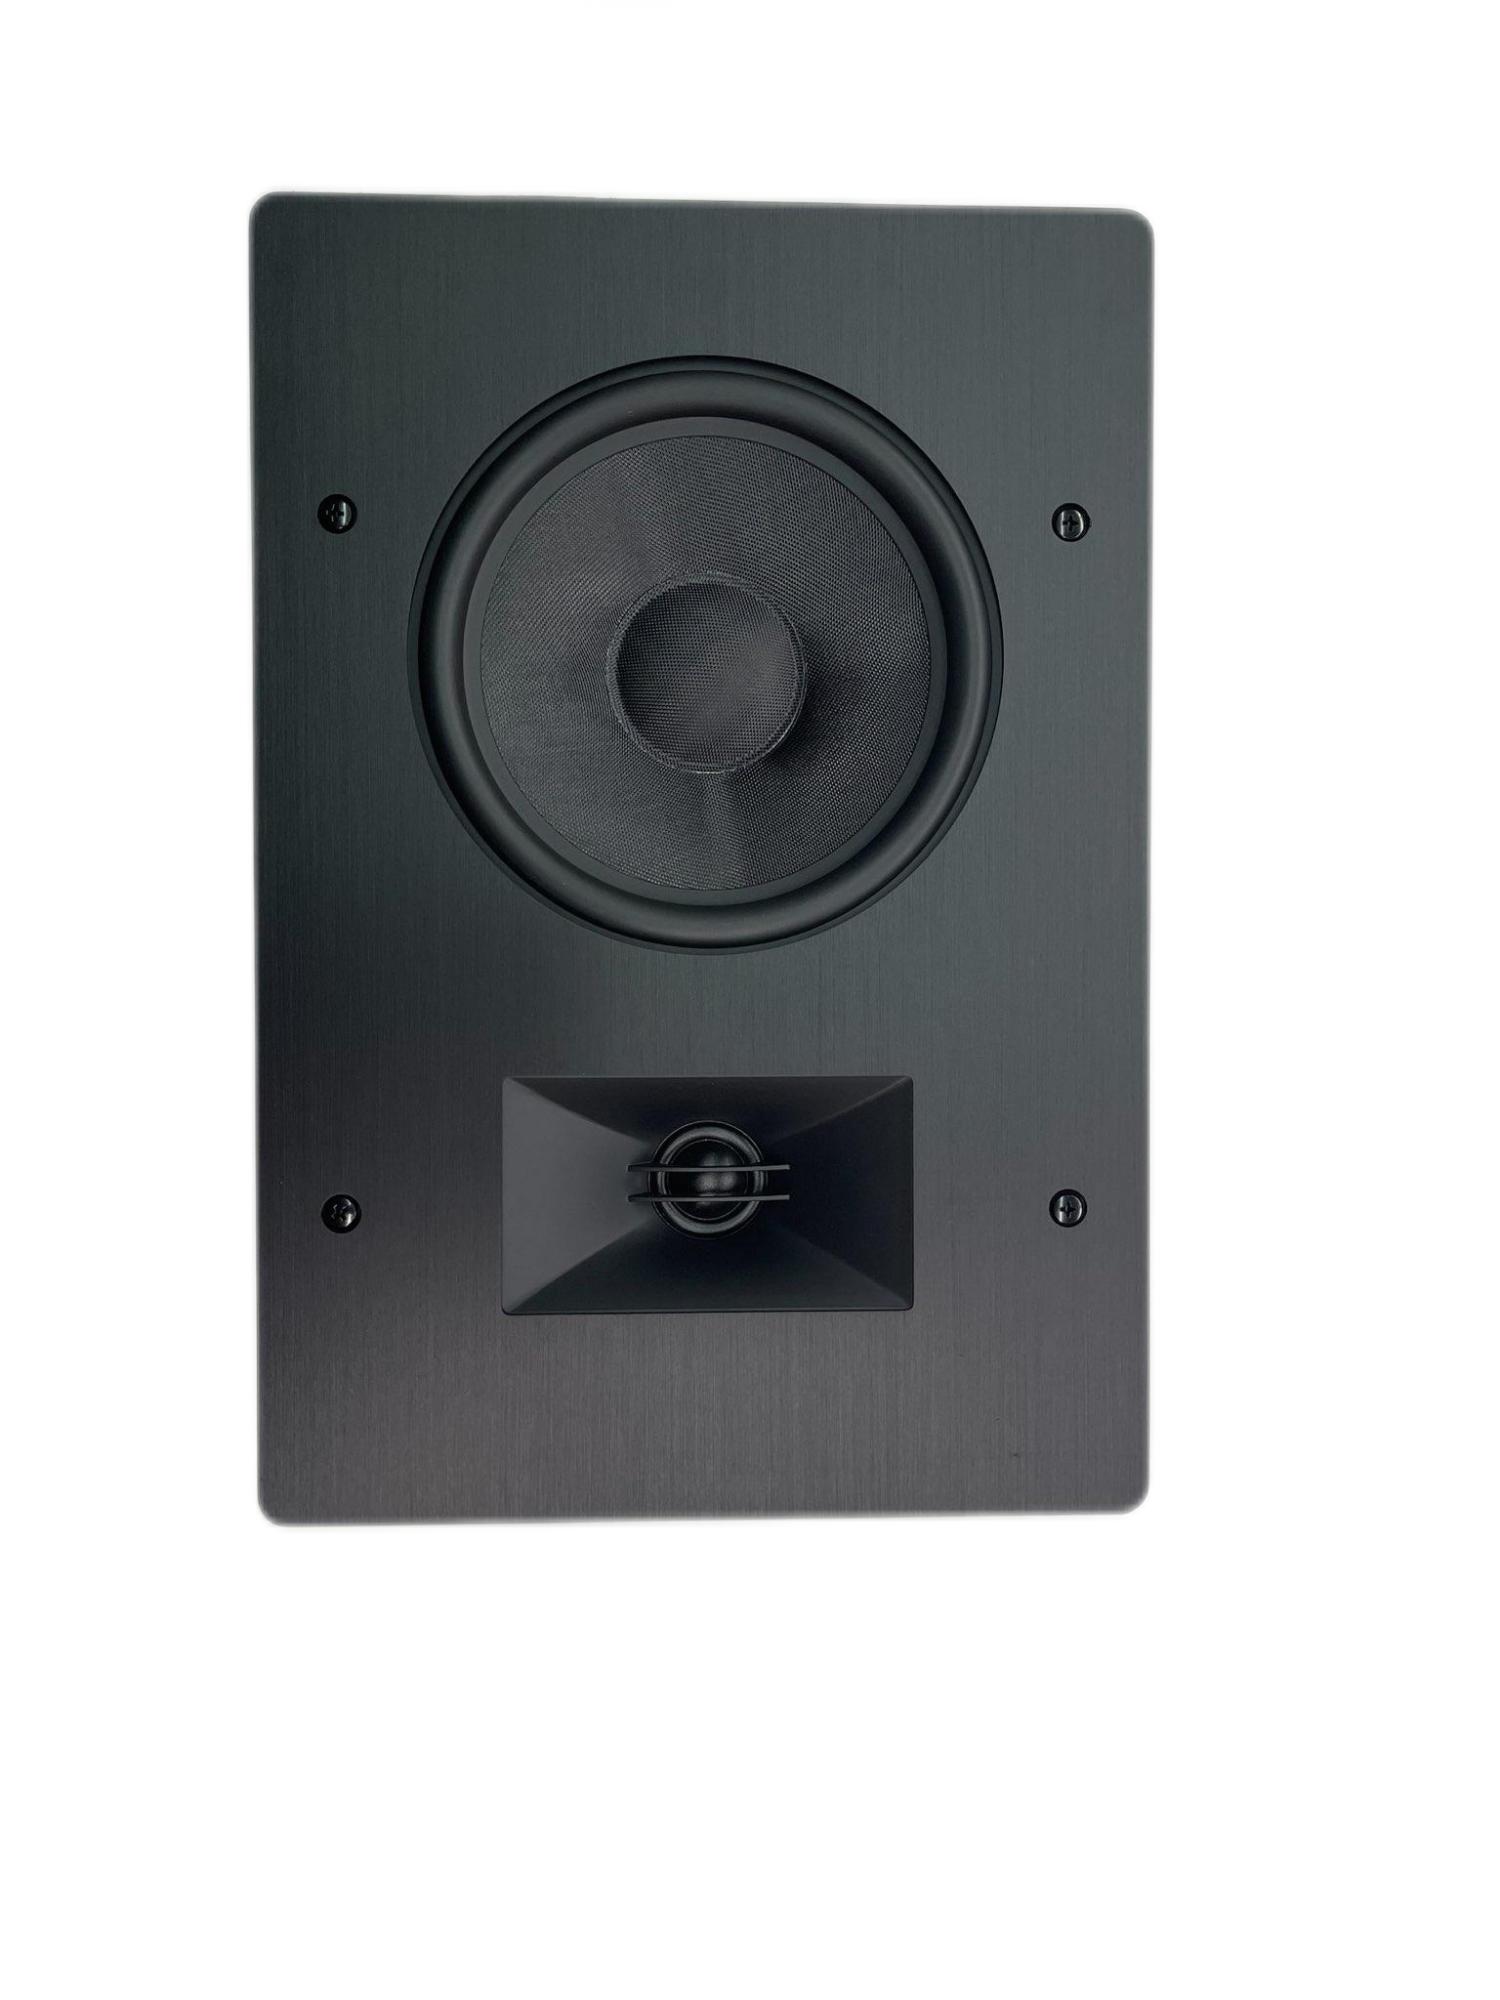 8 inch slim in-wall speaker for home theater surround sound